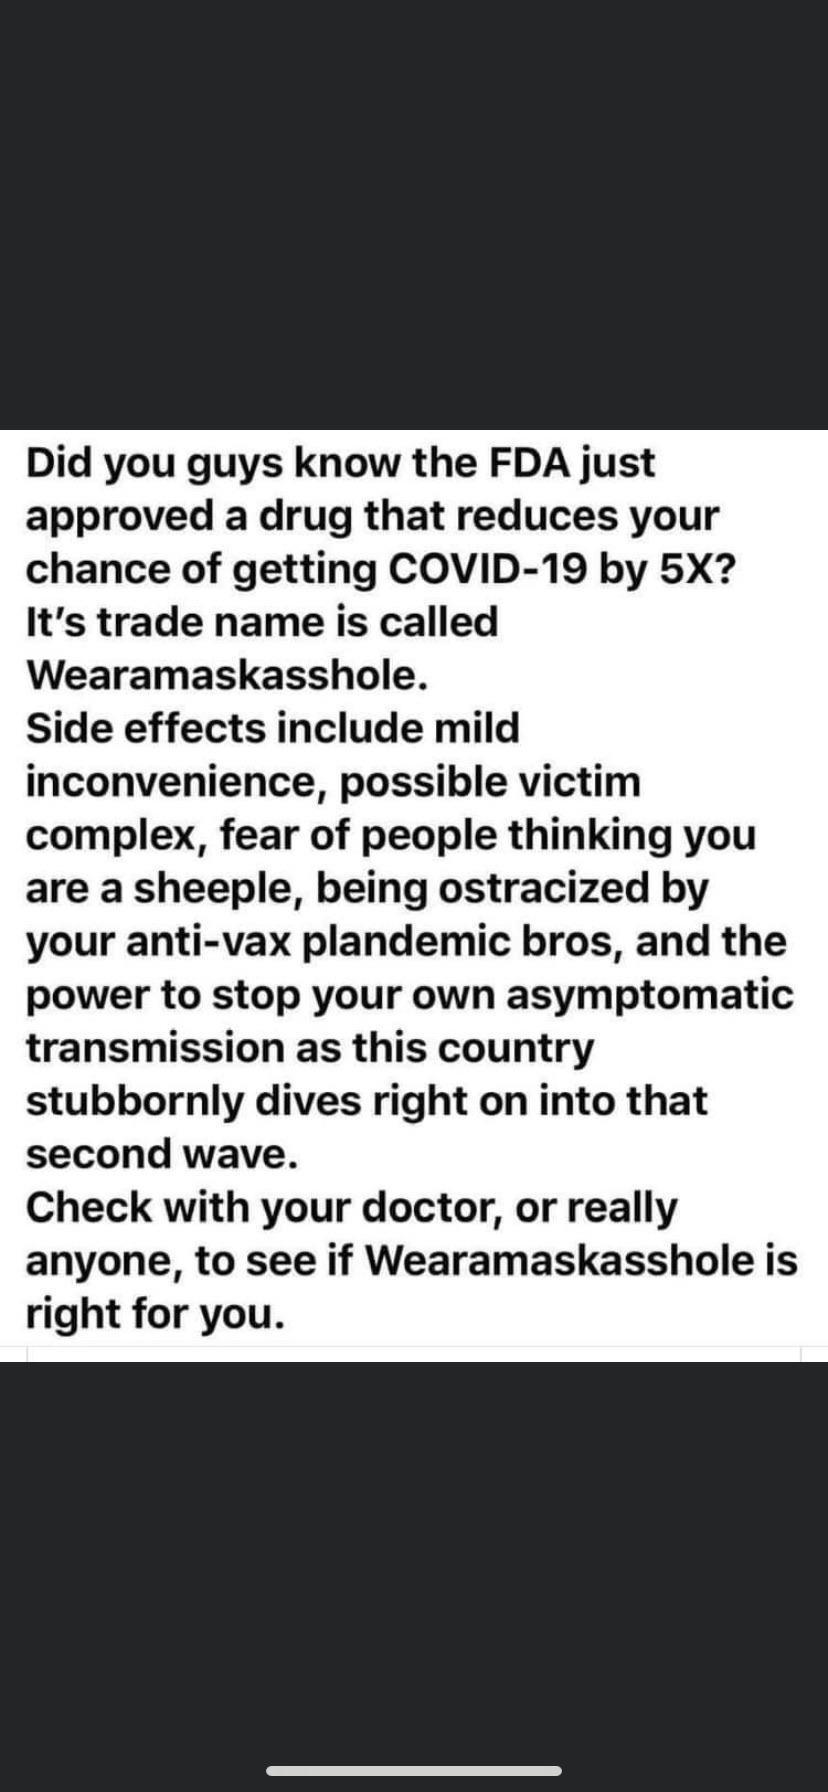 Political, Grandma boomer memes Political, Grandma text: Did you guys know the FDA just approved a drug that reduces your chance of getting COVID-19 by 5X? It's trade name is called Wearamaskasshole. Side effects include mild inconvenience, possible victim complex, fear of people thinking you are a sheeple, being ostracized by your anti-vax plandemic bros, and the power to stop your own asymptomatic transmission as this country stubbornly dives right on into that second wave. Check with your doctor, or really anyone, to see if Wearamaskasshole is right for you. 